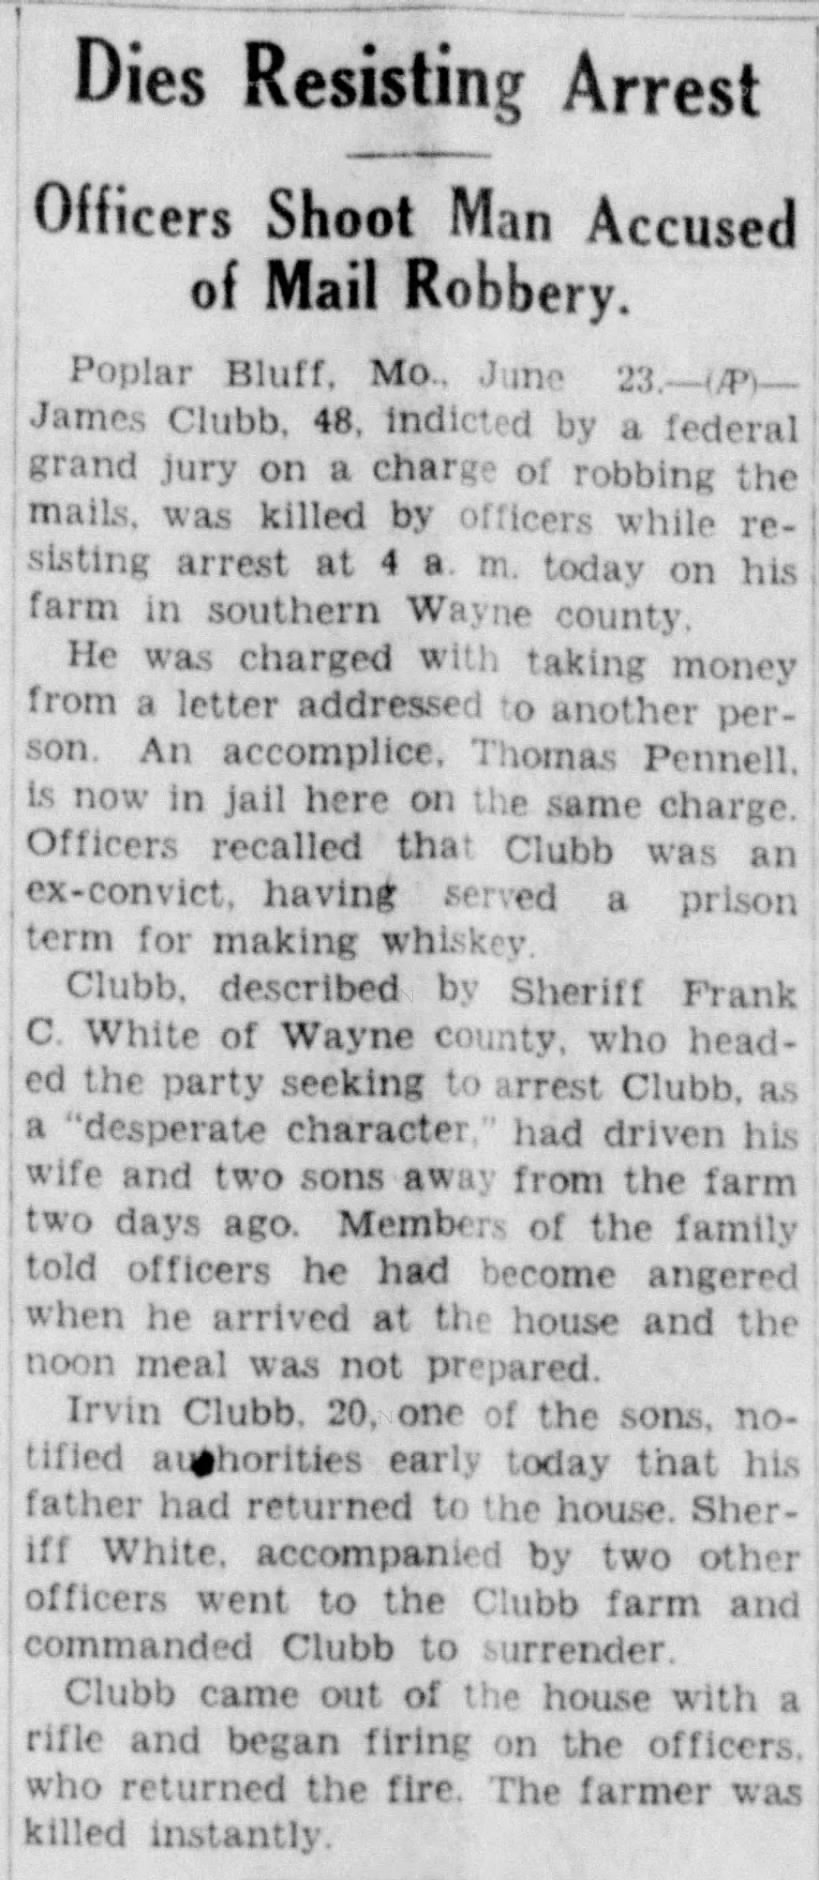 James Clubb - Mail robbery - Resists arrest - Killed - Clipped from The Maryville Daily Forum, 23 Ju